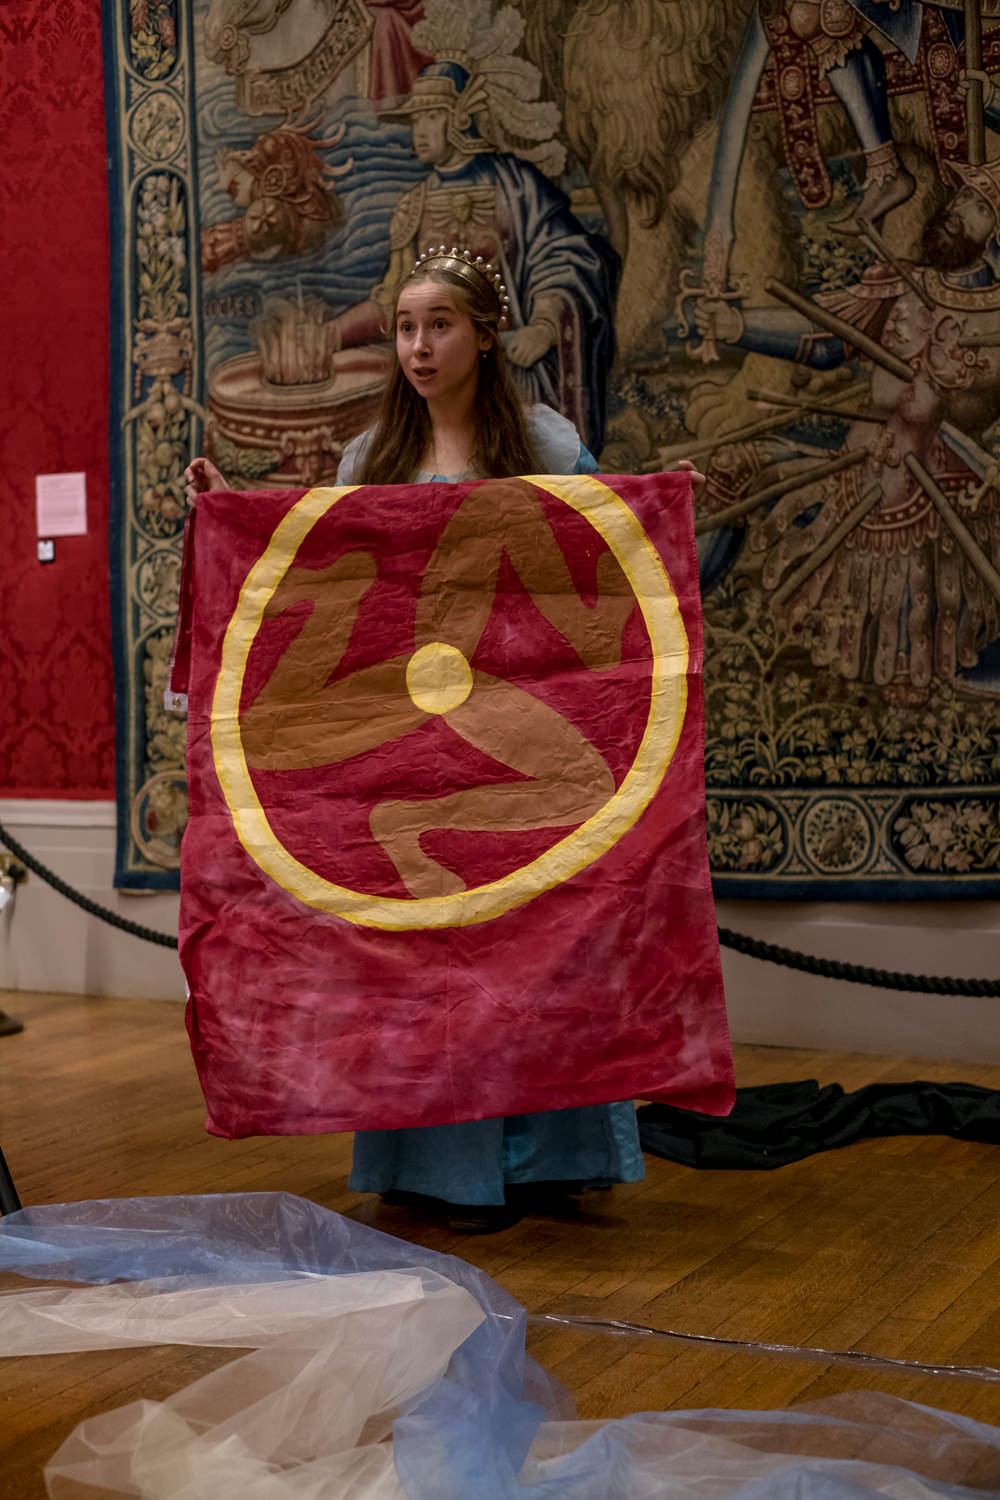 The actress holding a flag from the Isle of Man